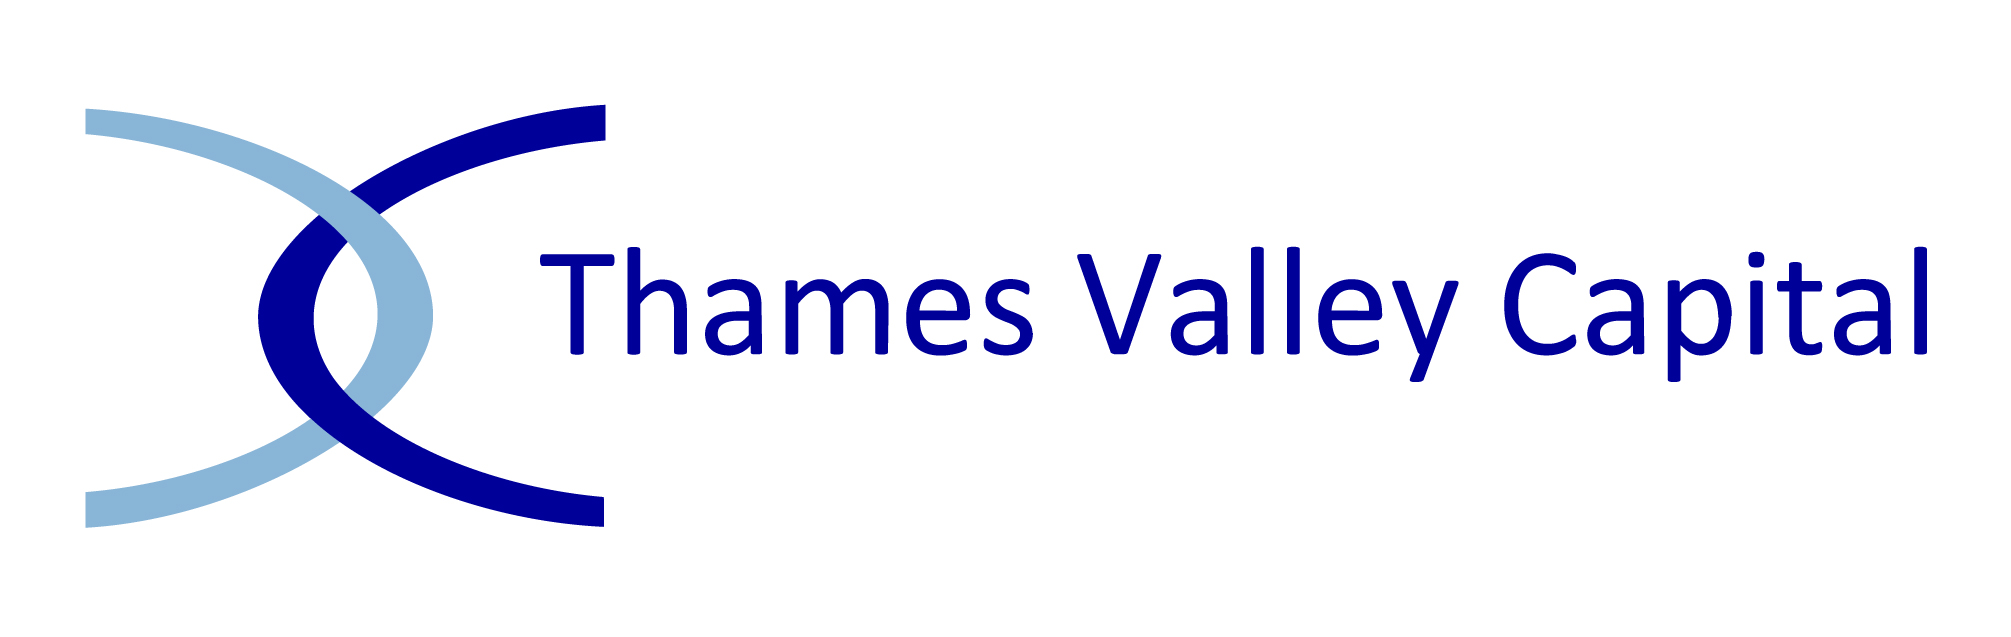 Thames Valley Capital